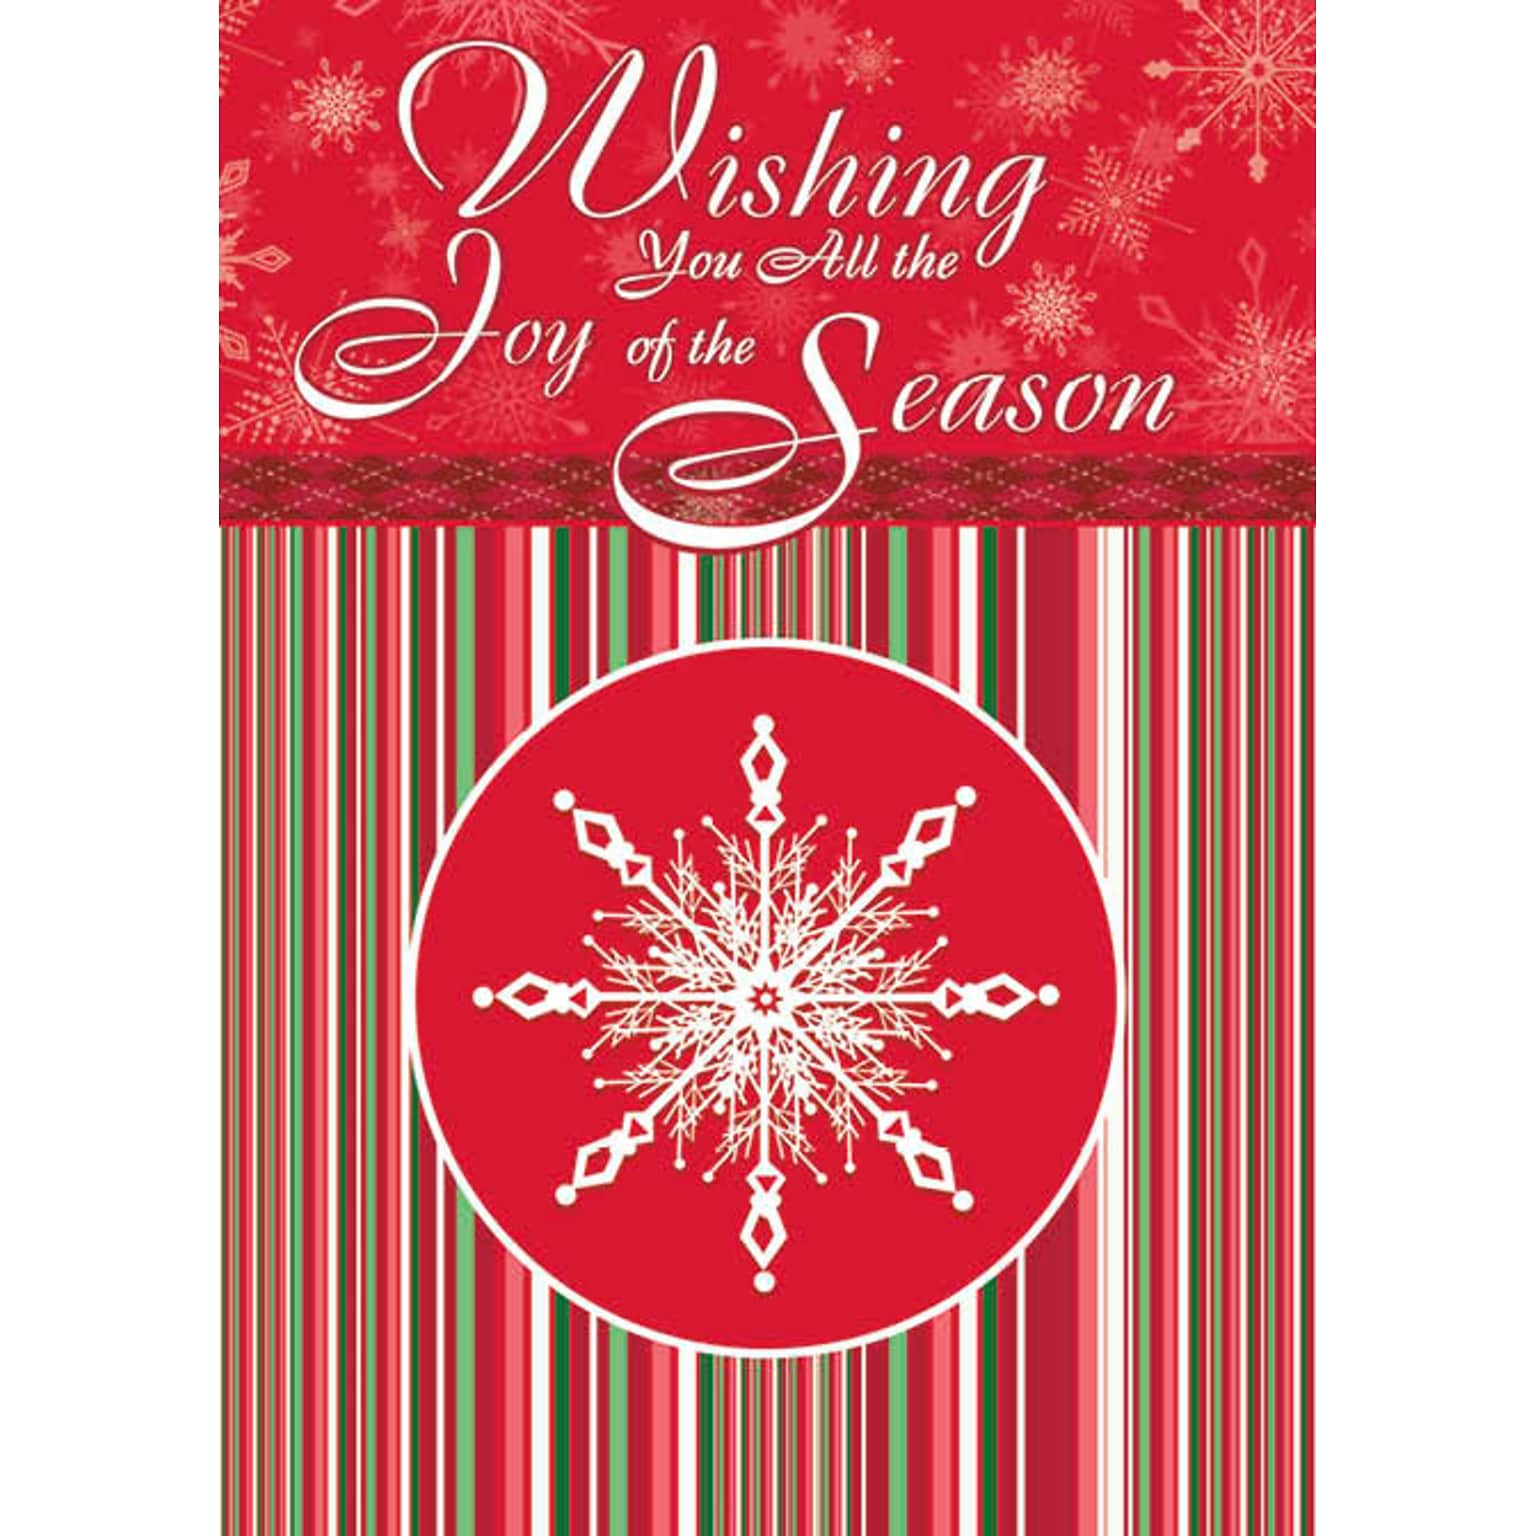 Wishing You All The Joy Of The Season Holiday Greeting Cards, With A7 Envelopes, 7 x 5, 25 Cards per Set